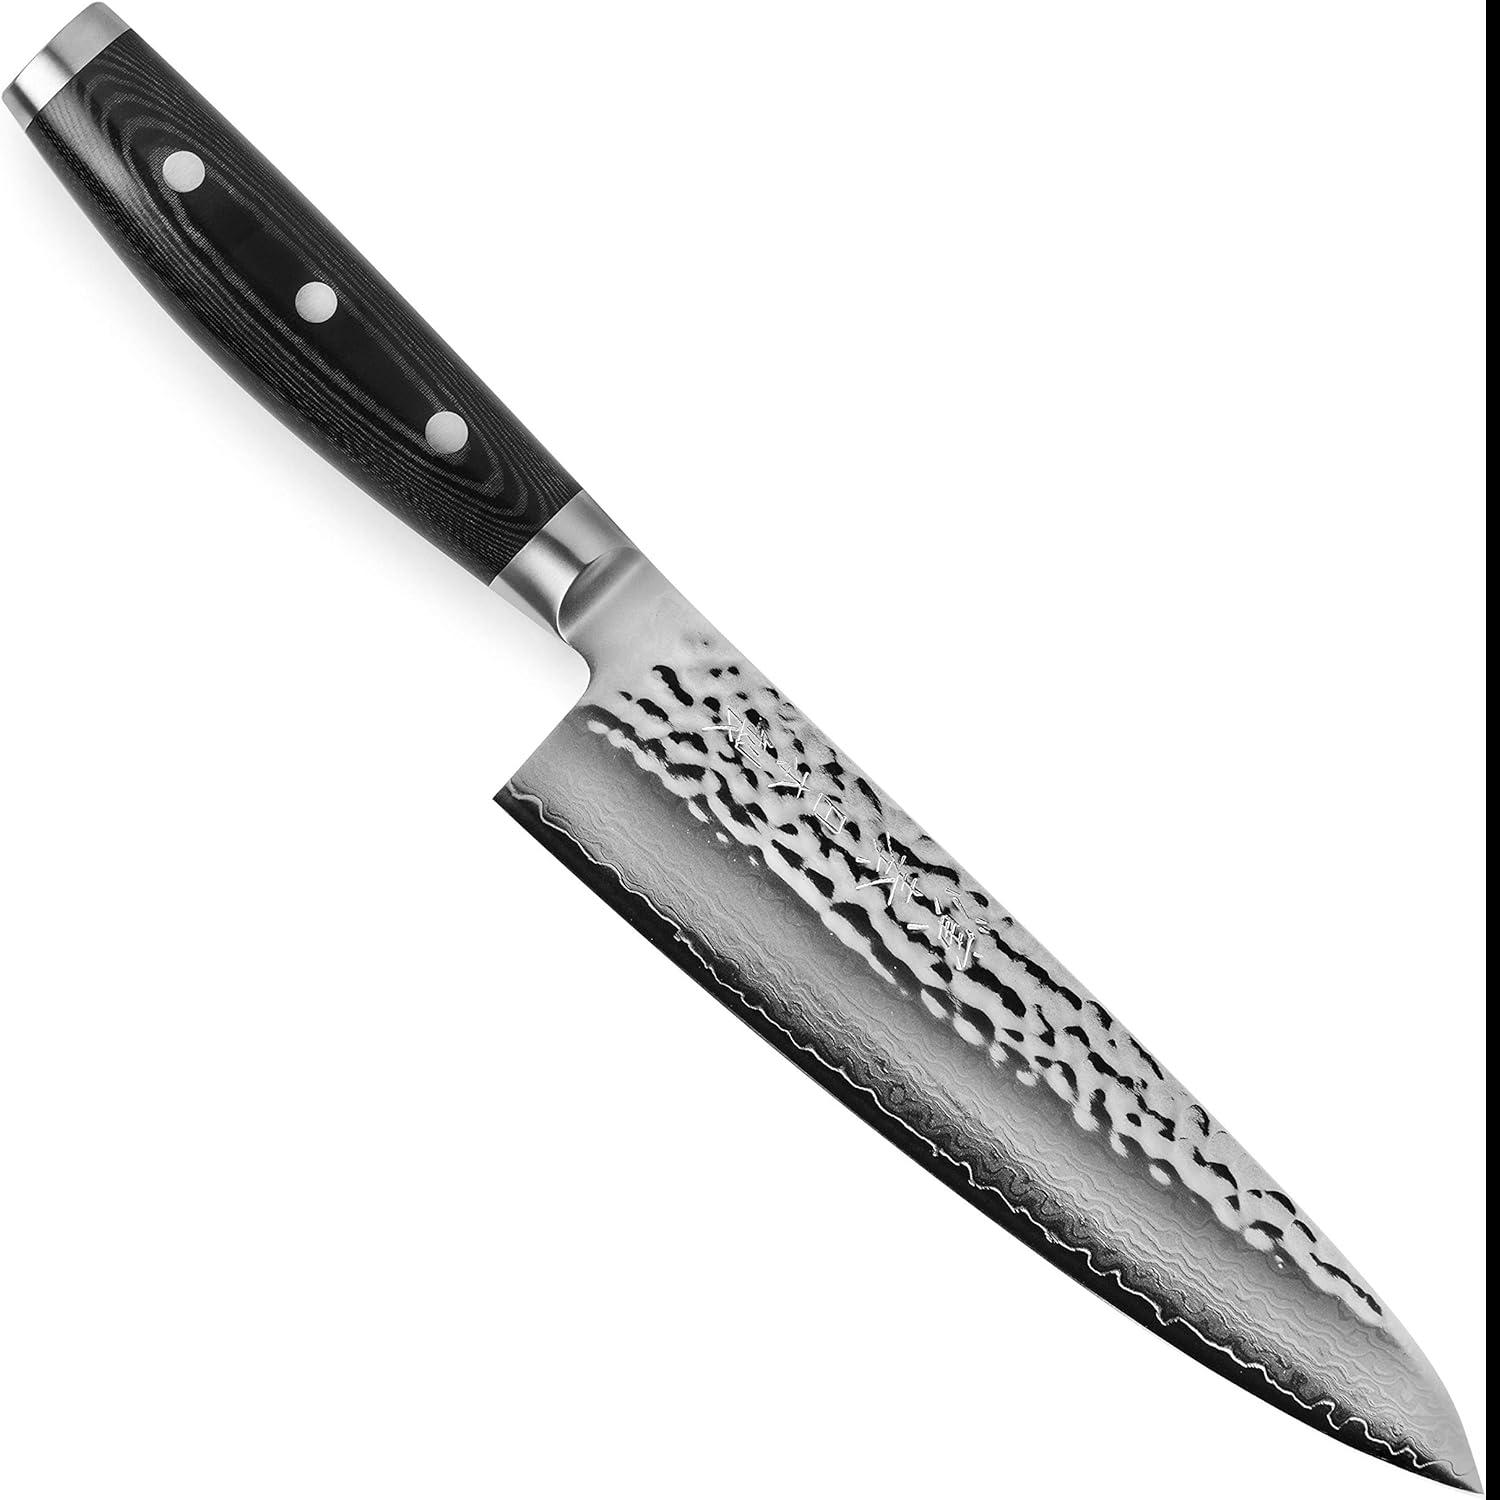 Enso 8in VG10 Hammered Damascus Chefs Knife for $79.95 Shipped